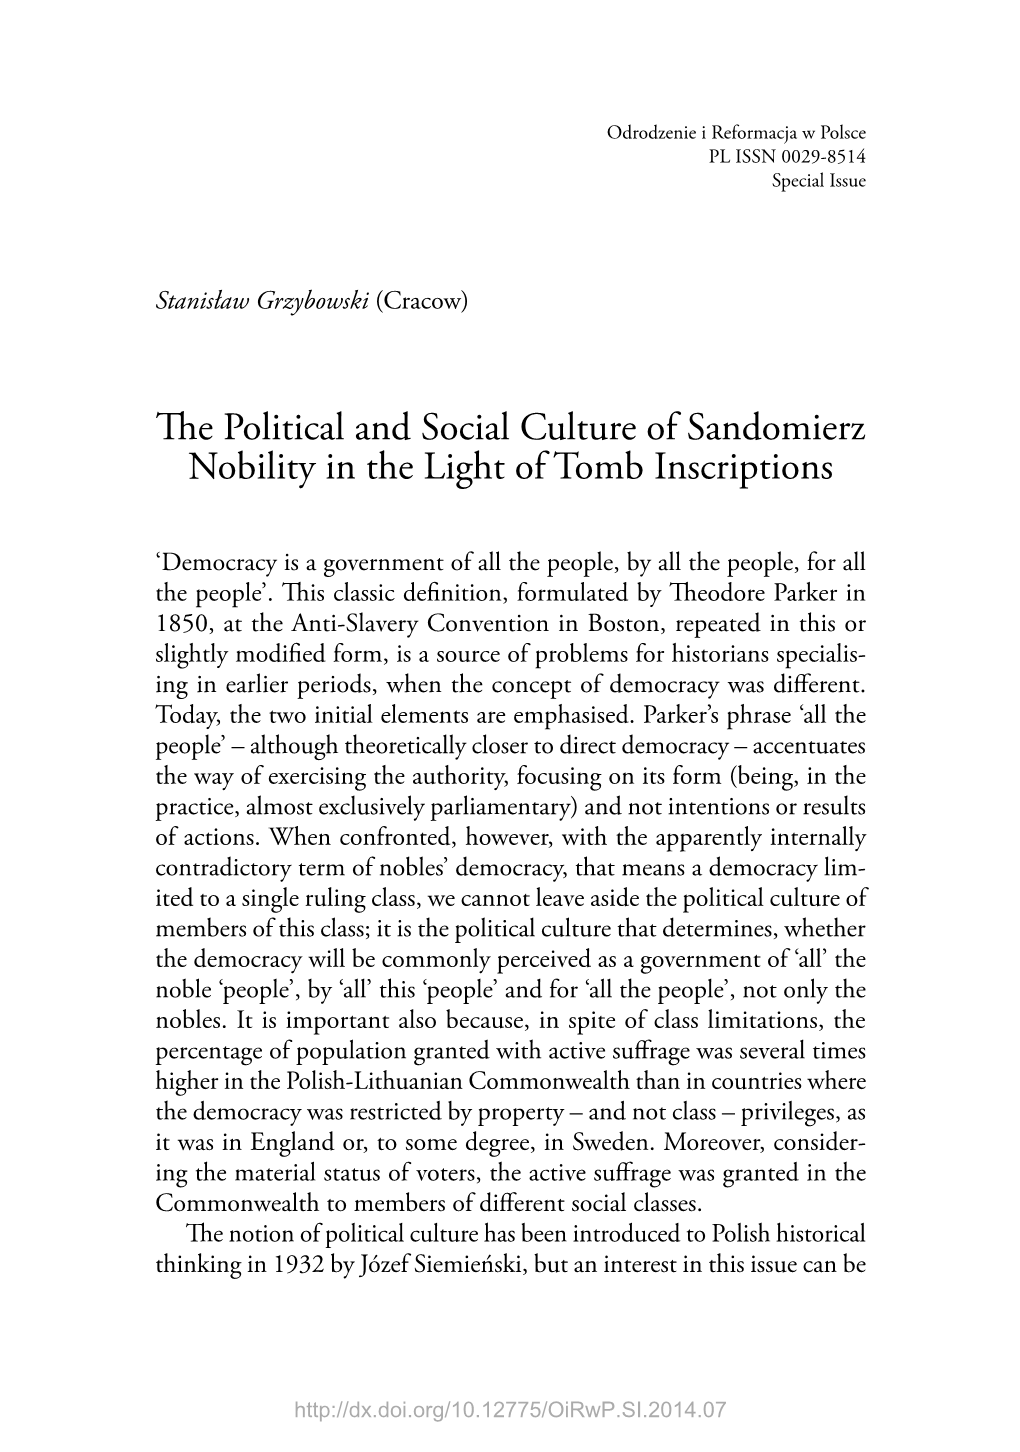 The Political and Social Culture of Sandomierz Nobility in the Light of Tomb Inscriptions